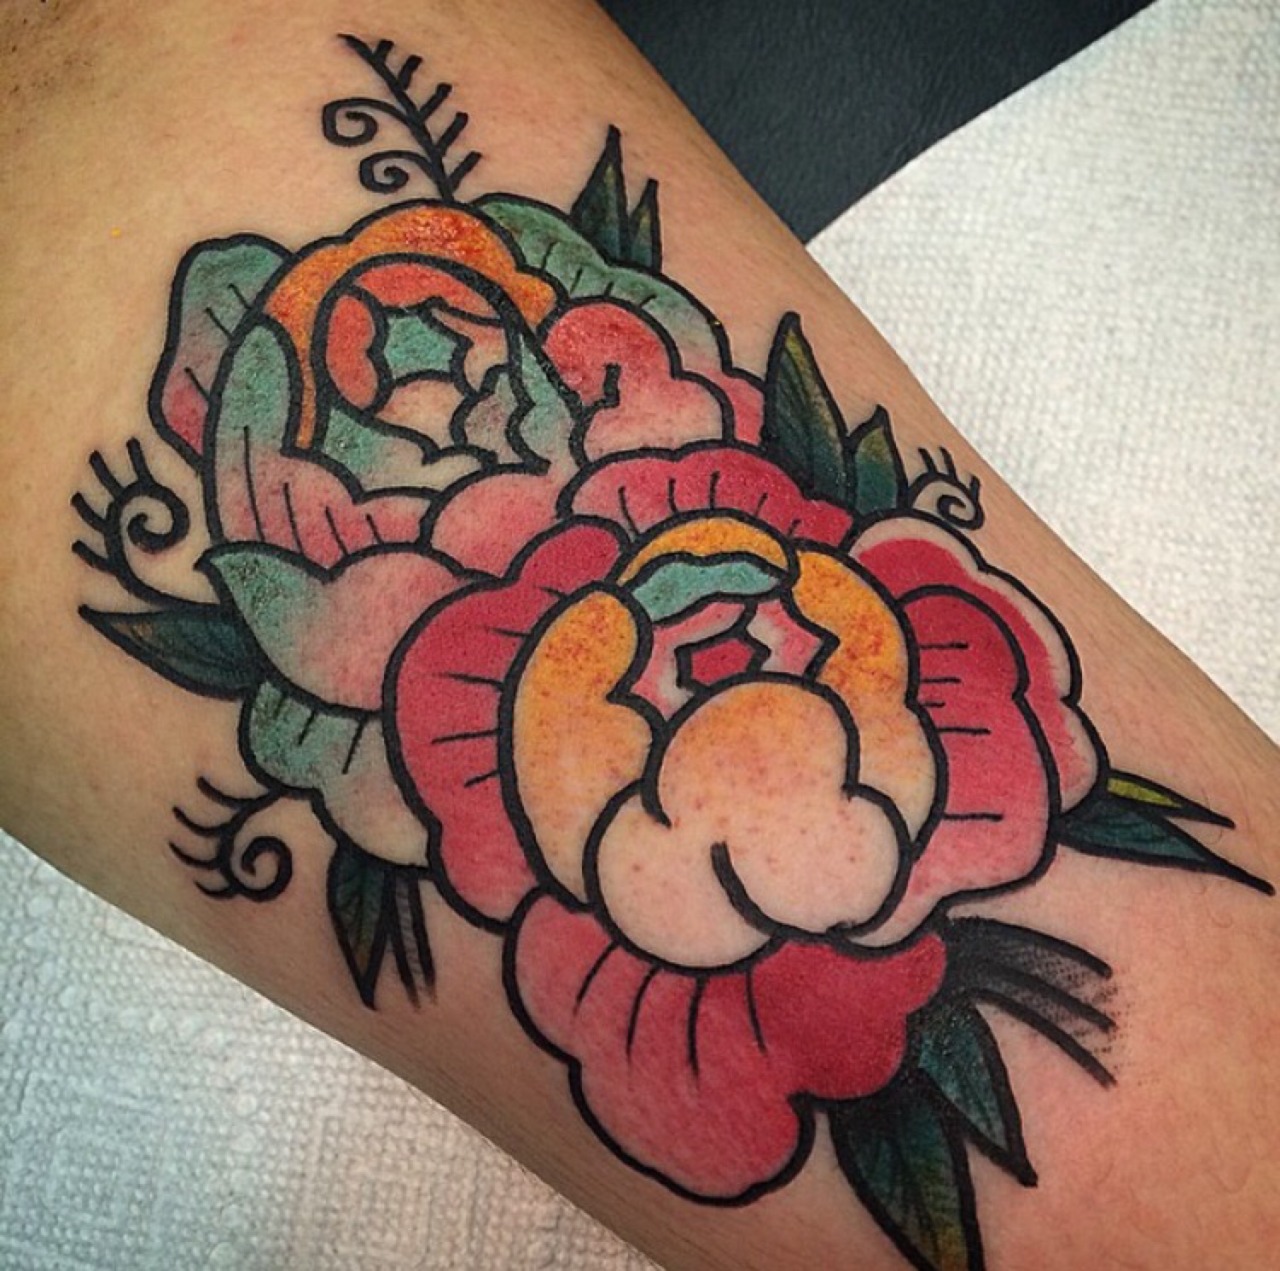 Troy Peace Traditional Roses Tattoo.jpg